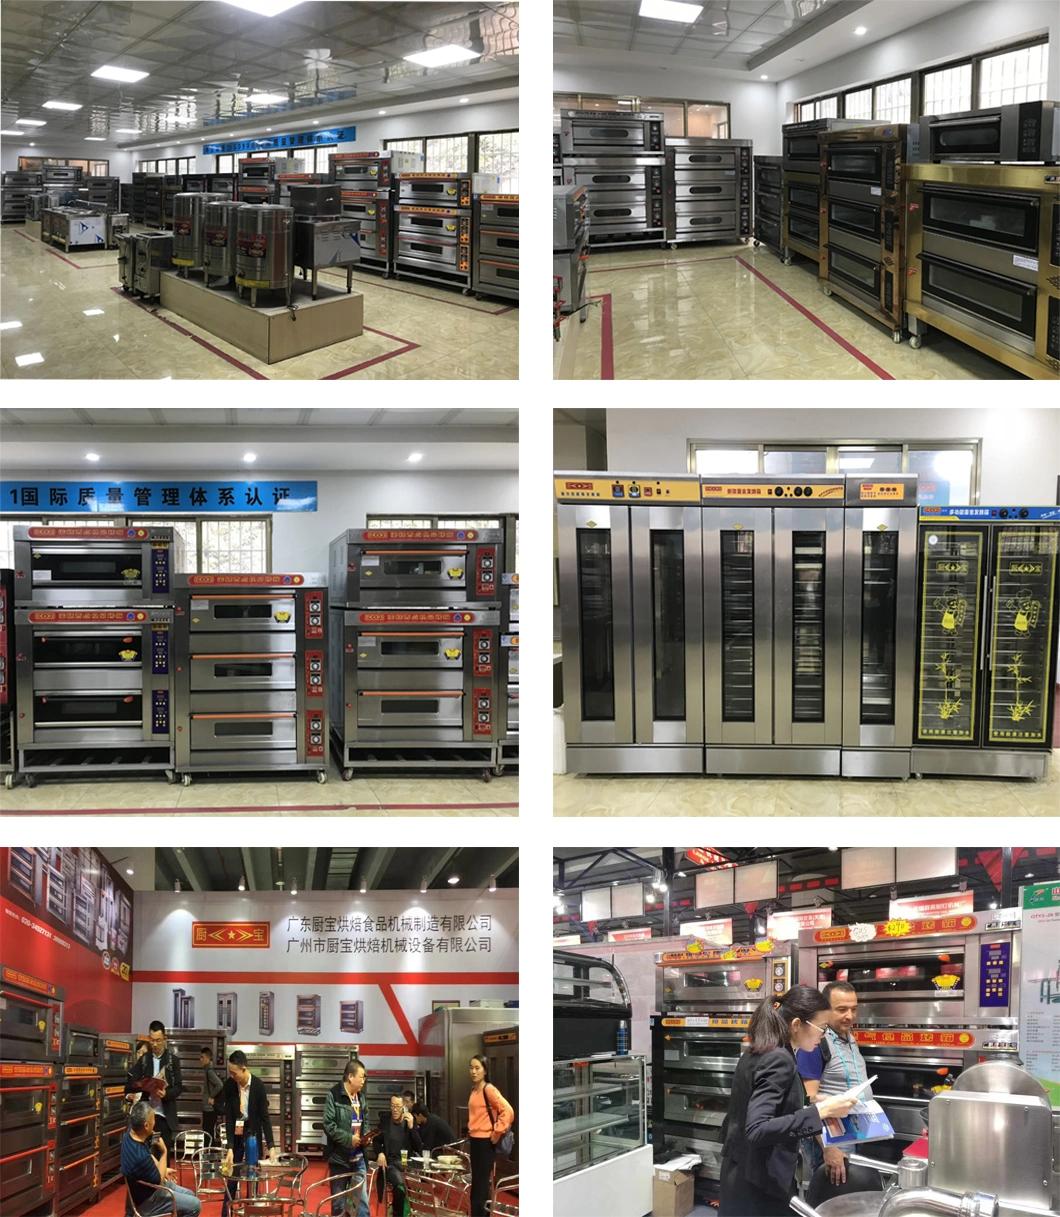 Commercial Kitchen 3 Deck 9 Trays Gas Oven for Restaurant Baking Equipment Bakery Machinery Food Machine